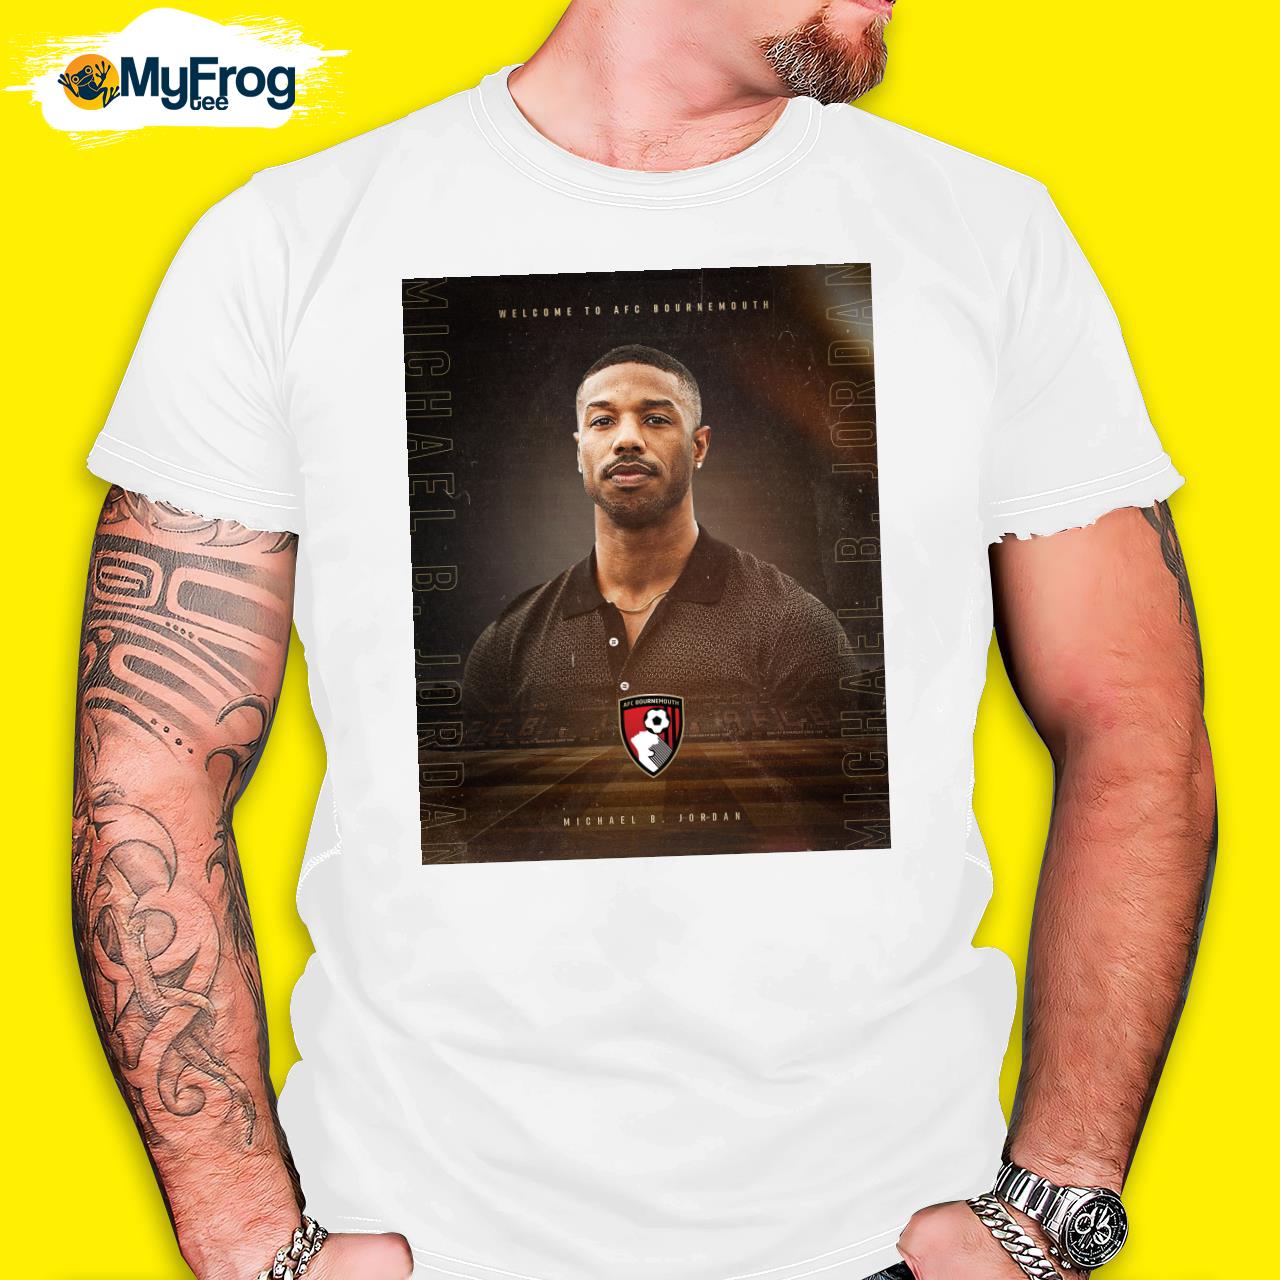 Afc Bournemouth Welcome To Afc Bournemouth Michael B Jordan 2022 shirt